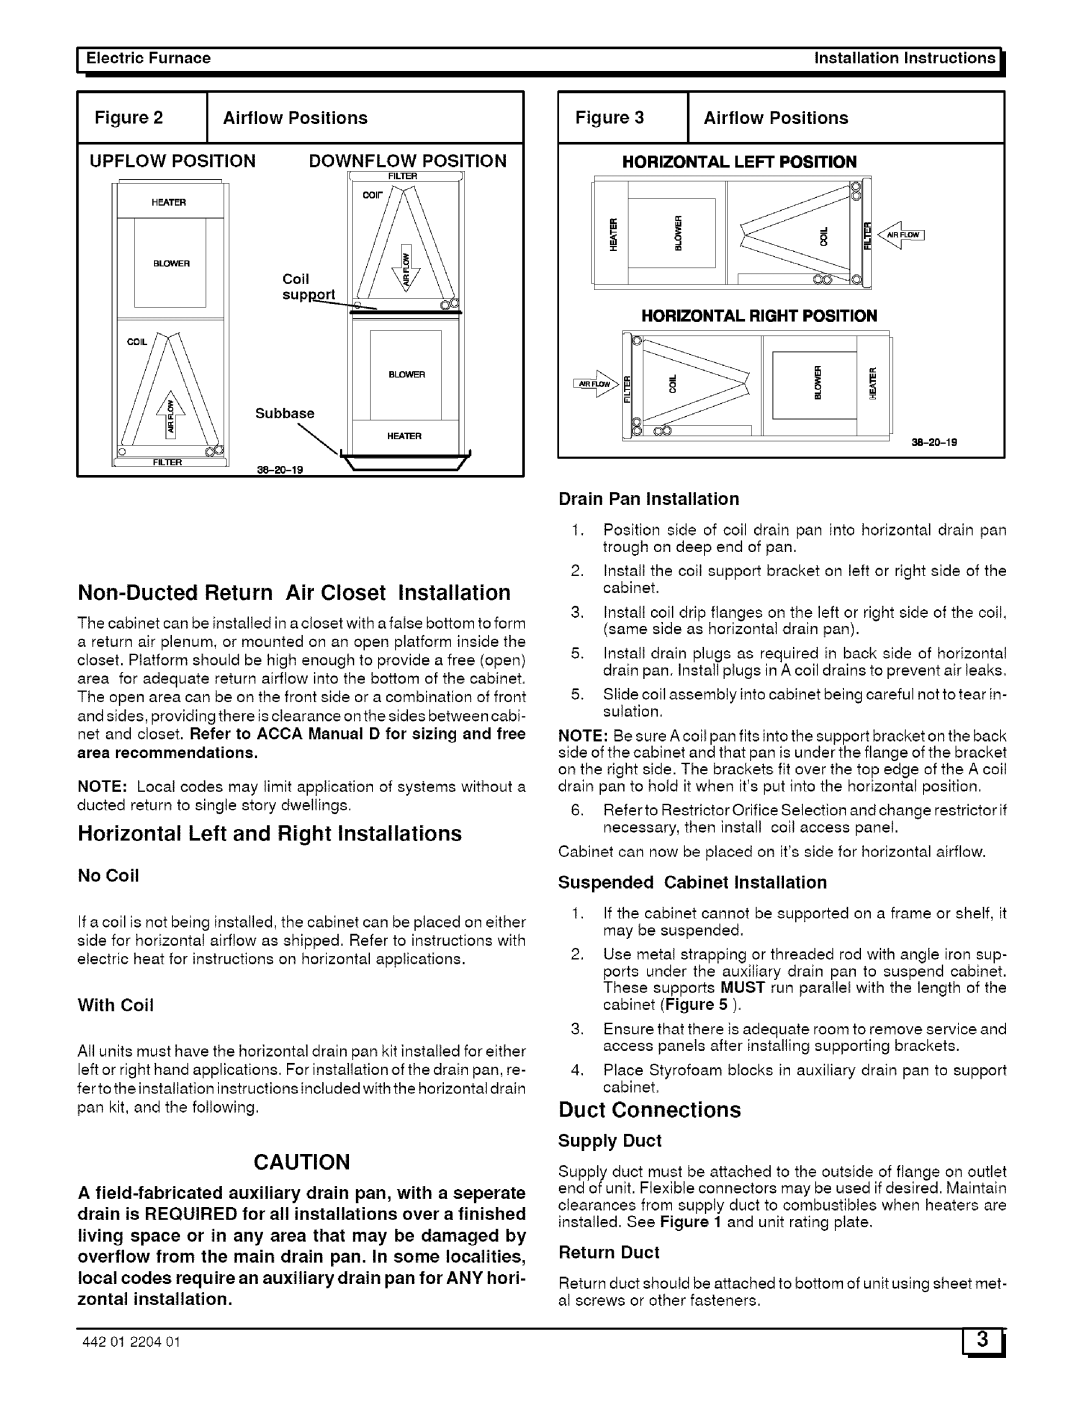 Sears EF08B1500A3 Duct Connections, Non-Ducted Return Air Closet Installation, Horizontal Left and Right Installations 